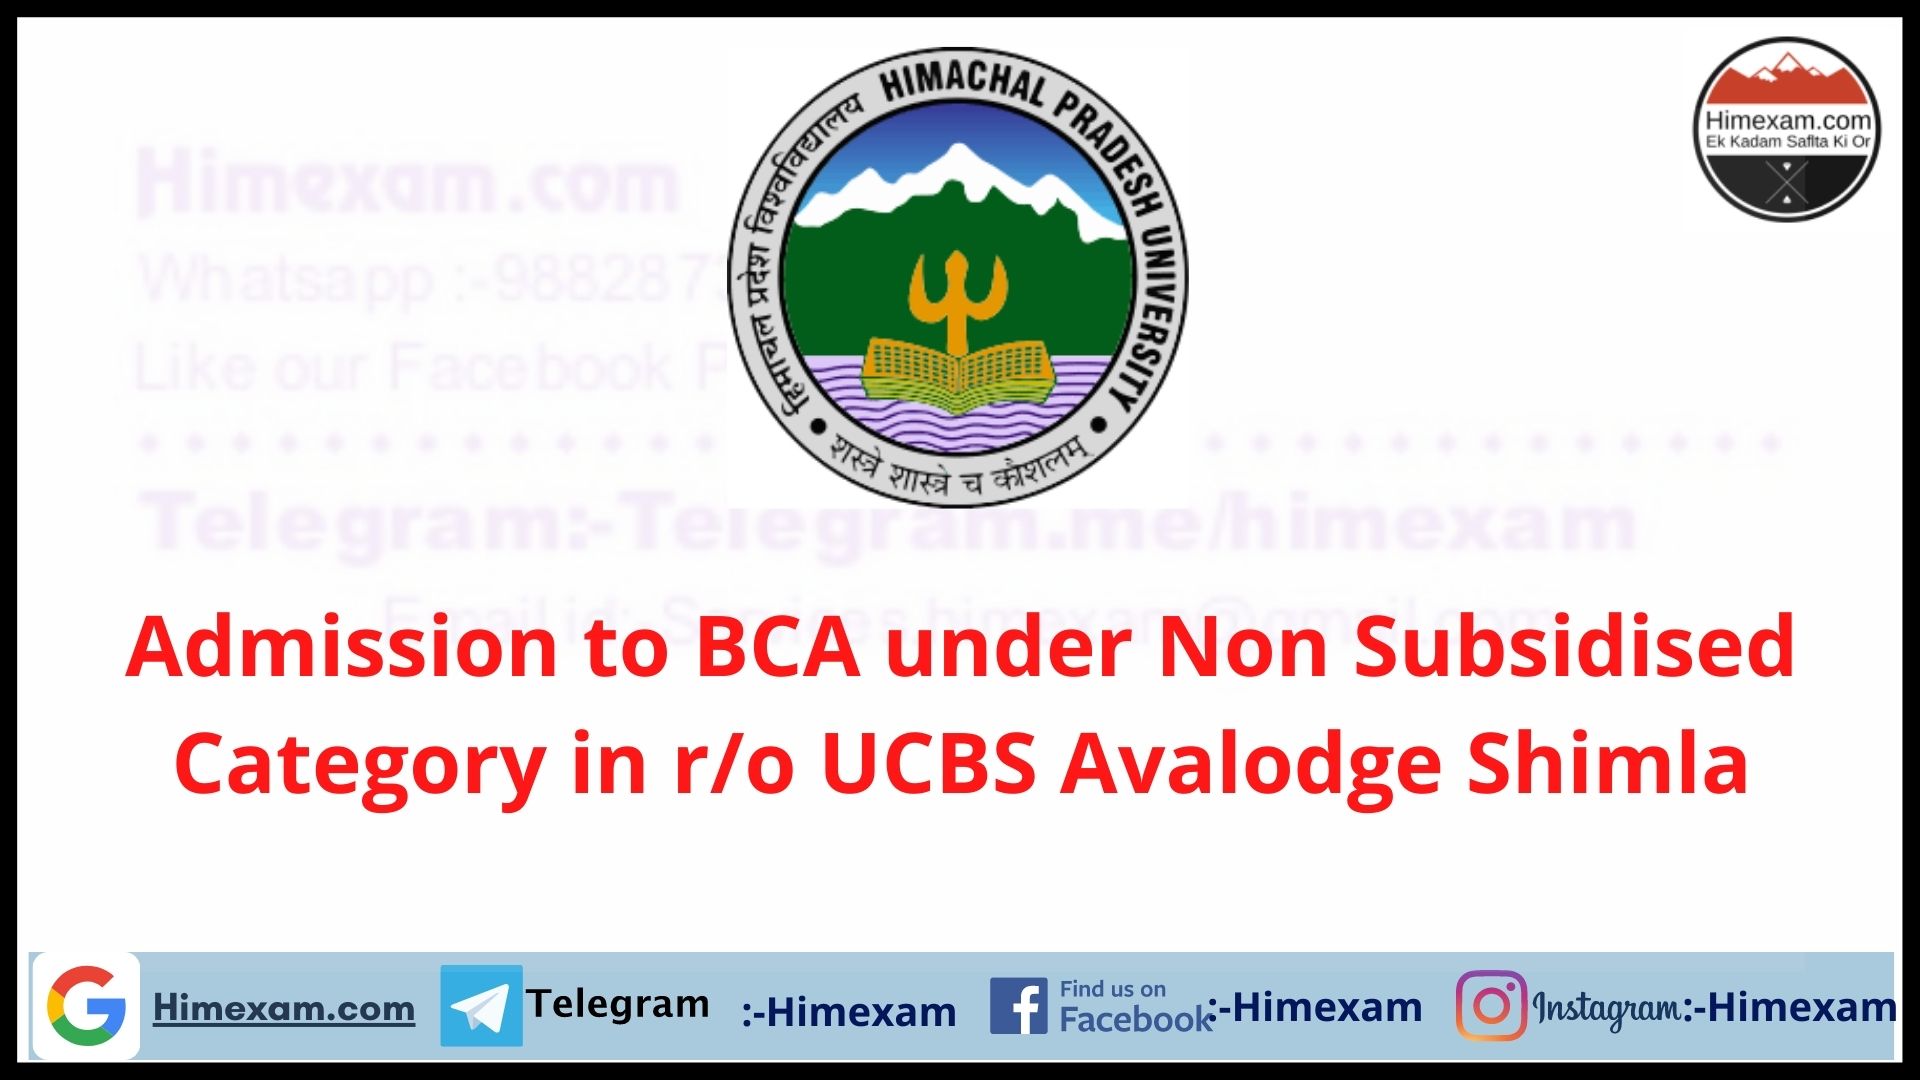 Admission to BCA under Non Subsidised Category in r/o UCBS Avalodge Shimla